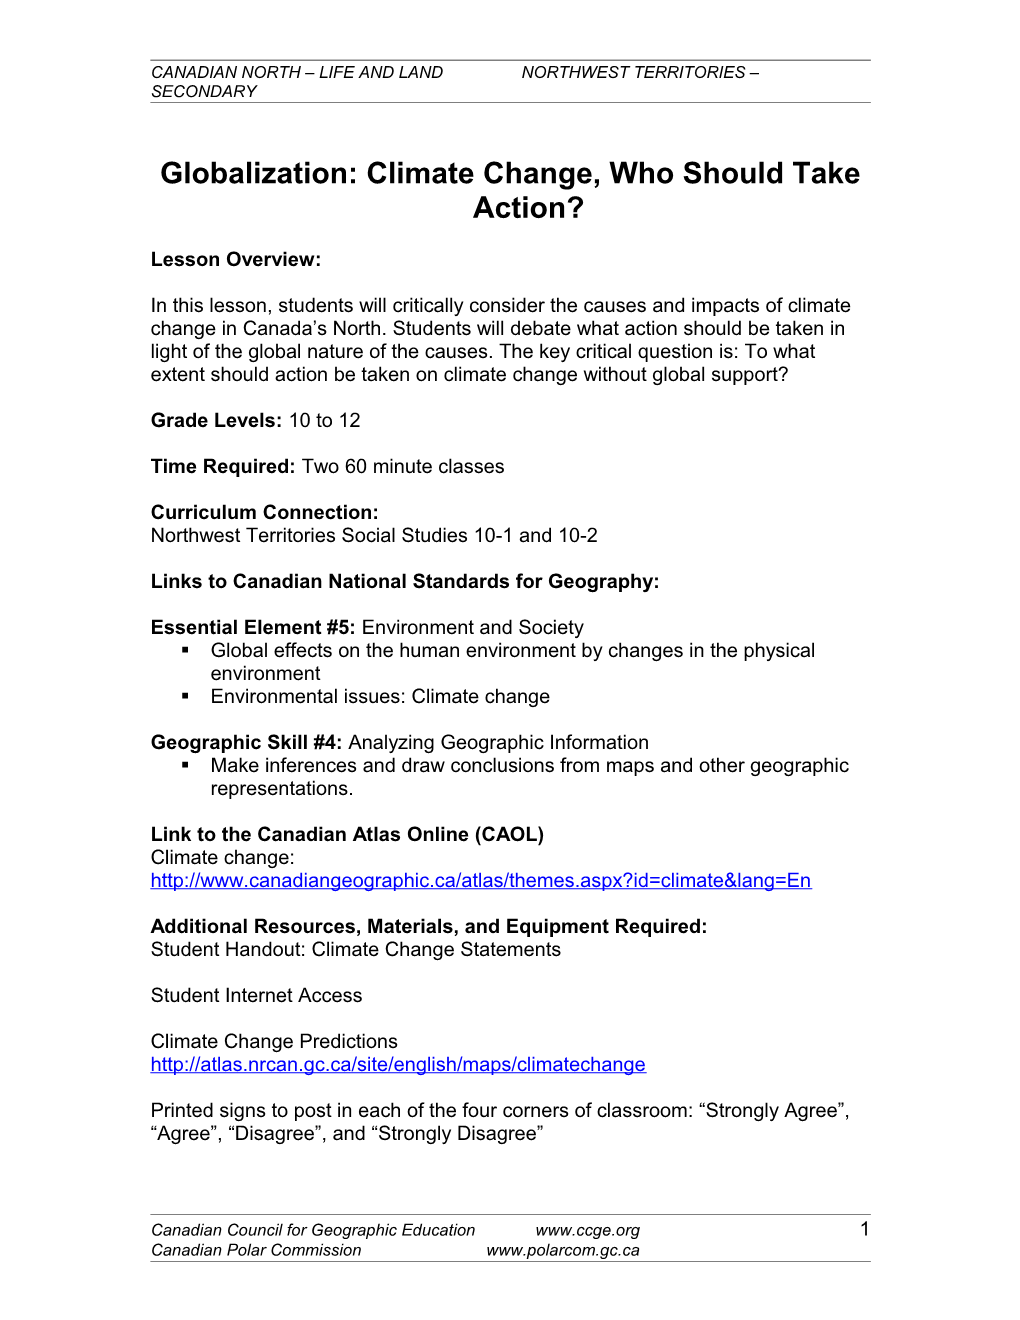 Globalization: Climate Change, Who Should Take Action?